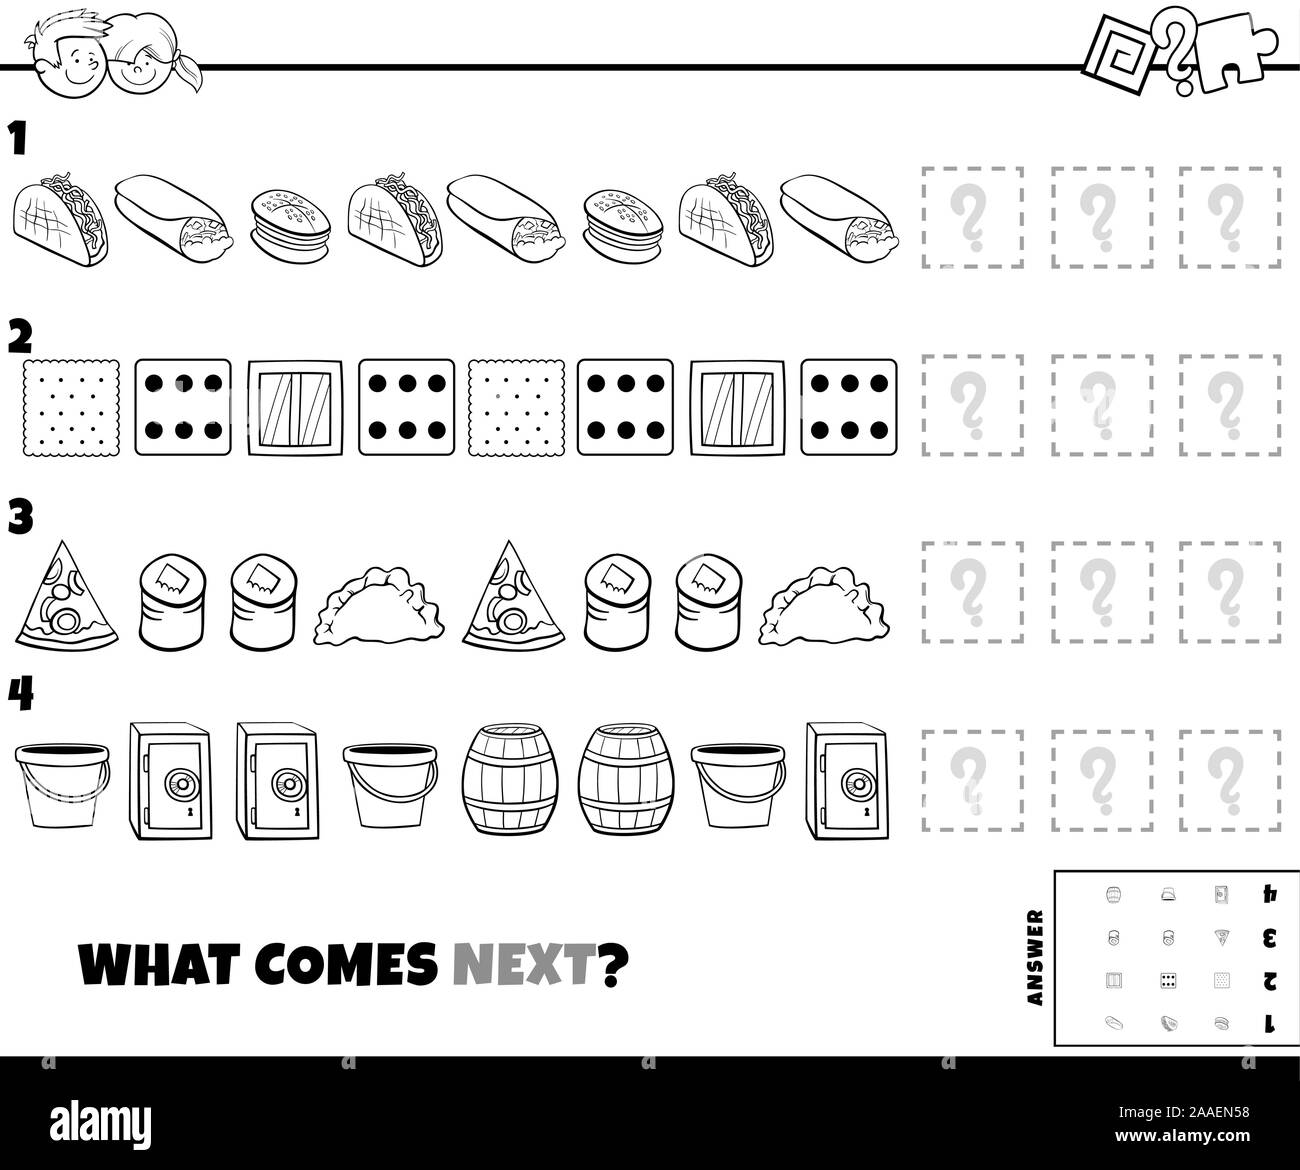 Black and White Cartoon Illustration of Completing the Pattern Educational Game for Kids with Food and Objects Coloring Book Page Stock Vector